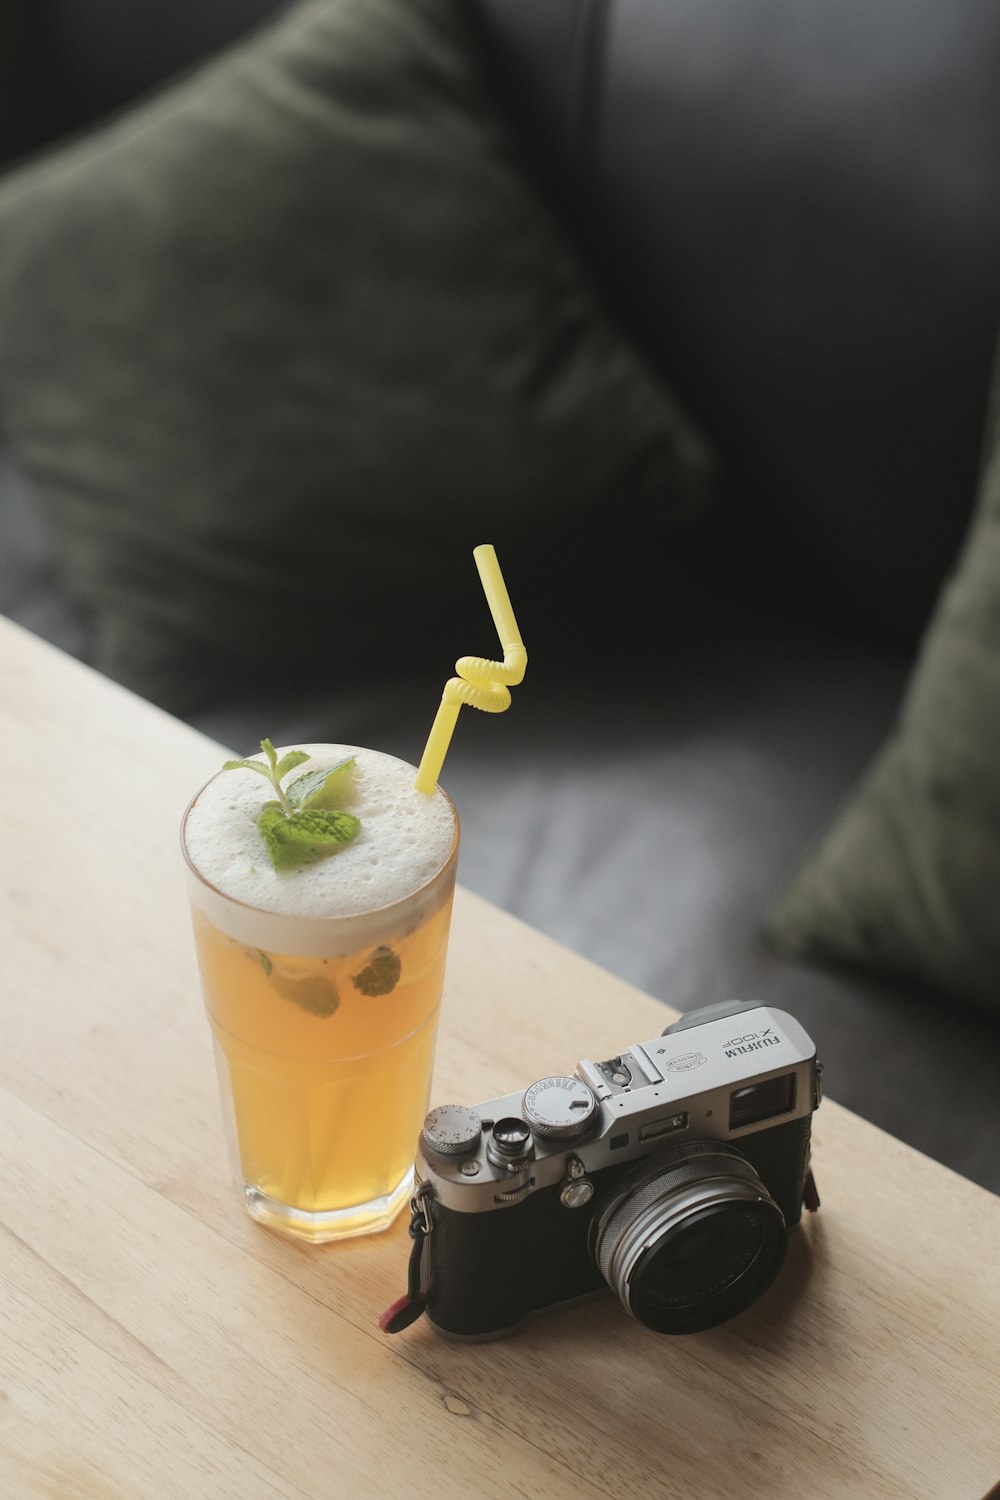 a camera and a drink on a table